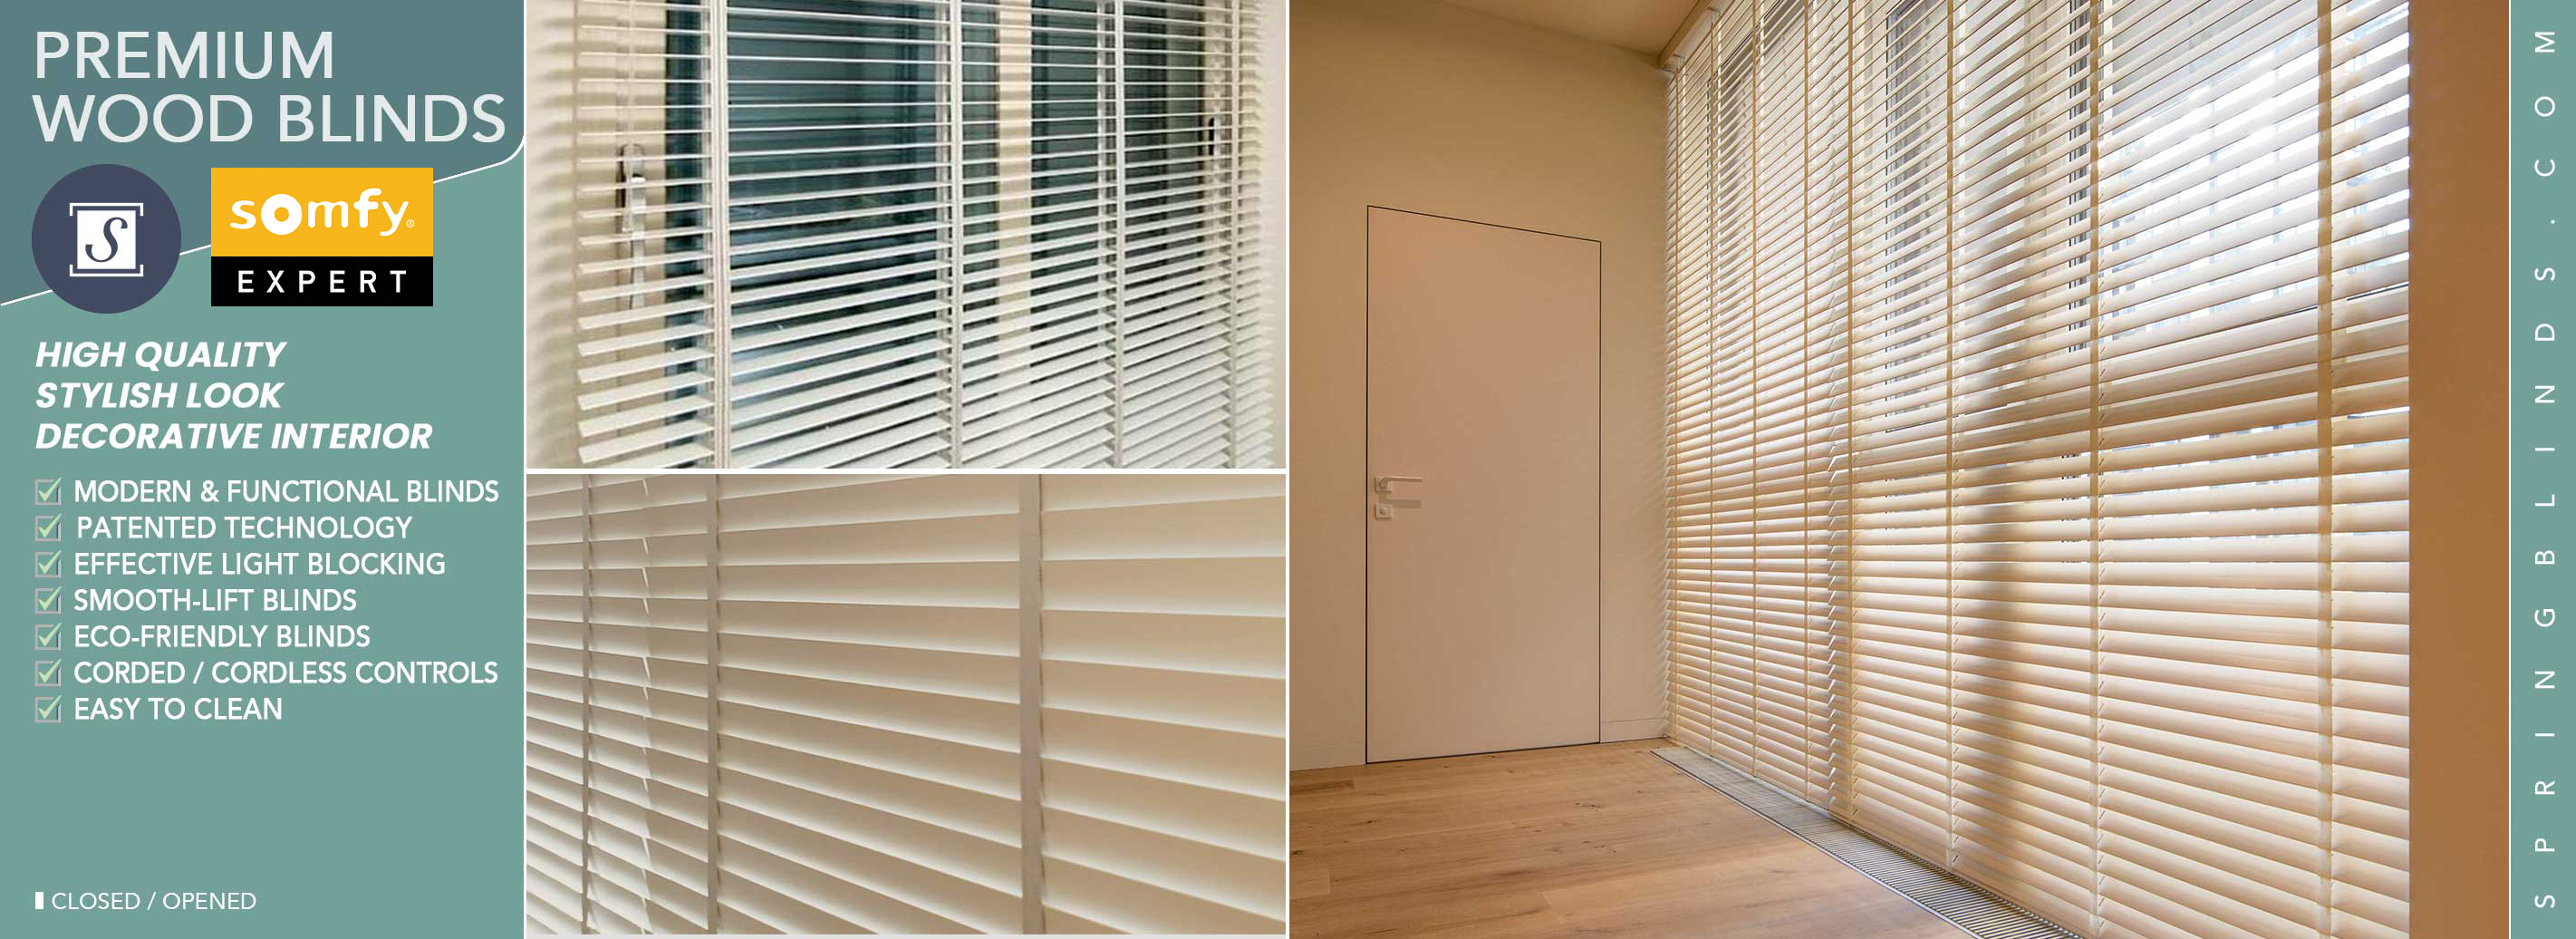 Continental Blinds, Blinds, Shades, Shutters, Drapery